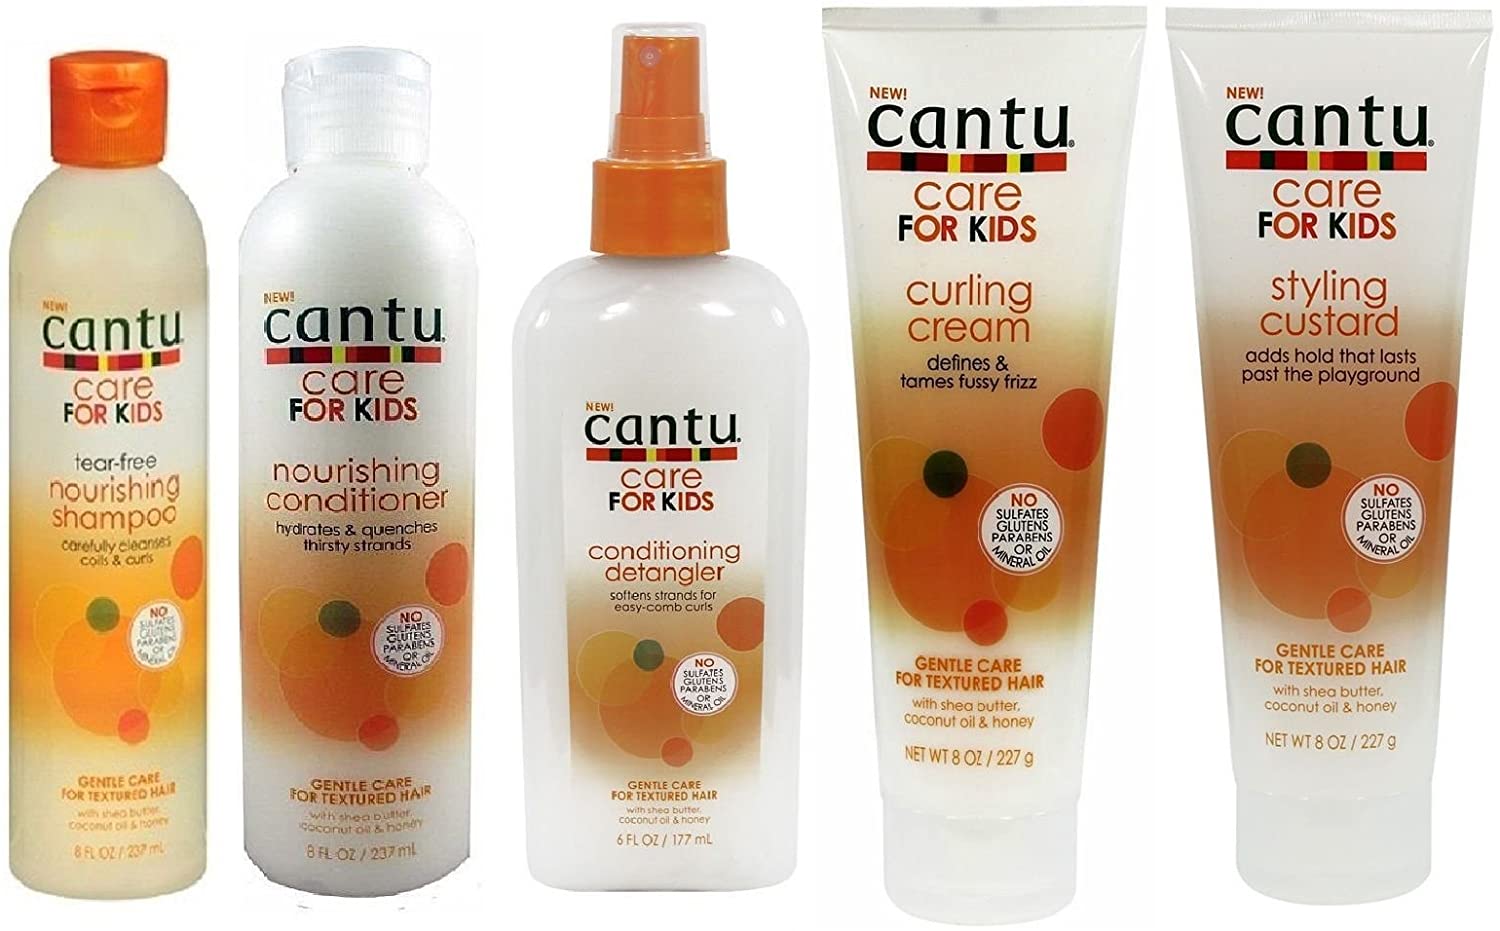 Cantu Care for Kids, Gentle Care